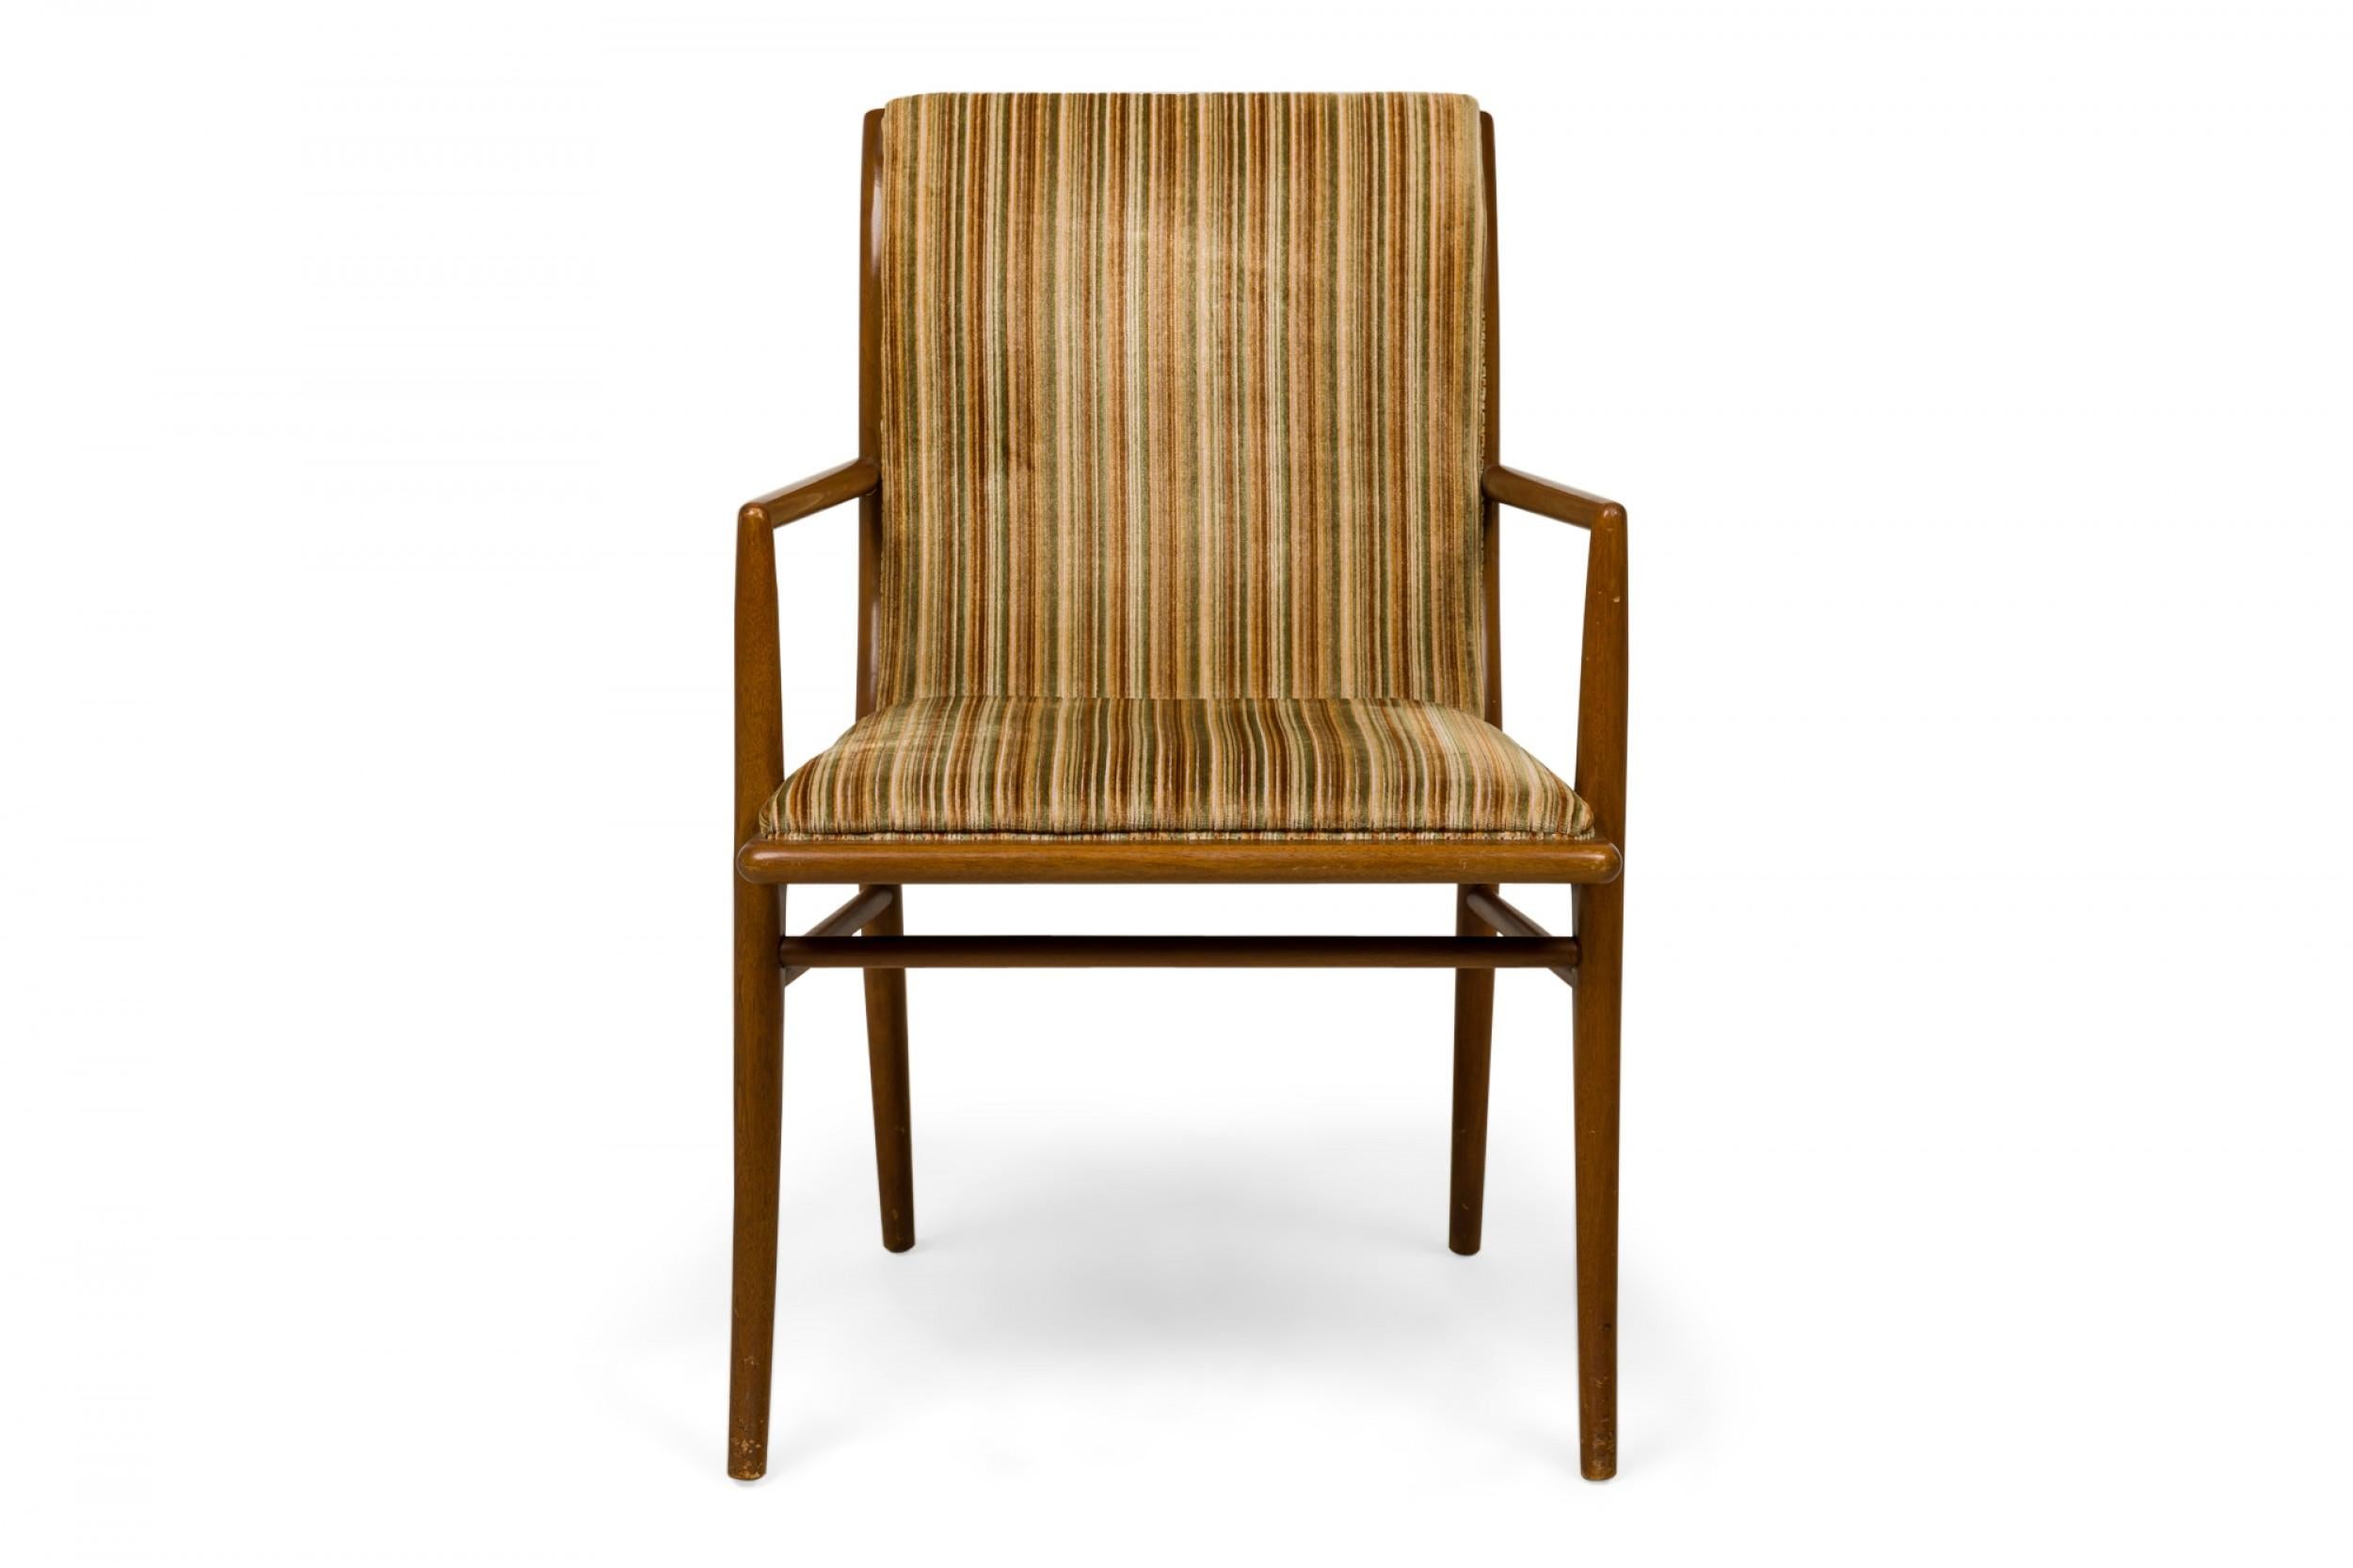 PAIR of Mid-Century dining armchairs with beige and gold striped fabric upholstery and a walnut frame with thin delicate arms, and curved slat backs, resting on four tapered legs. (T.H. ROBSJOHN-GIBBINGS FOR WIDDICOMB FURNITURE COMPANY)(PRICED AS